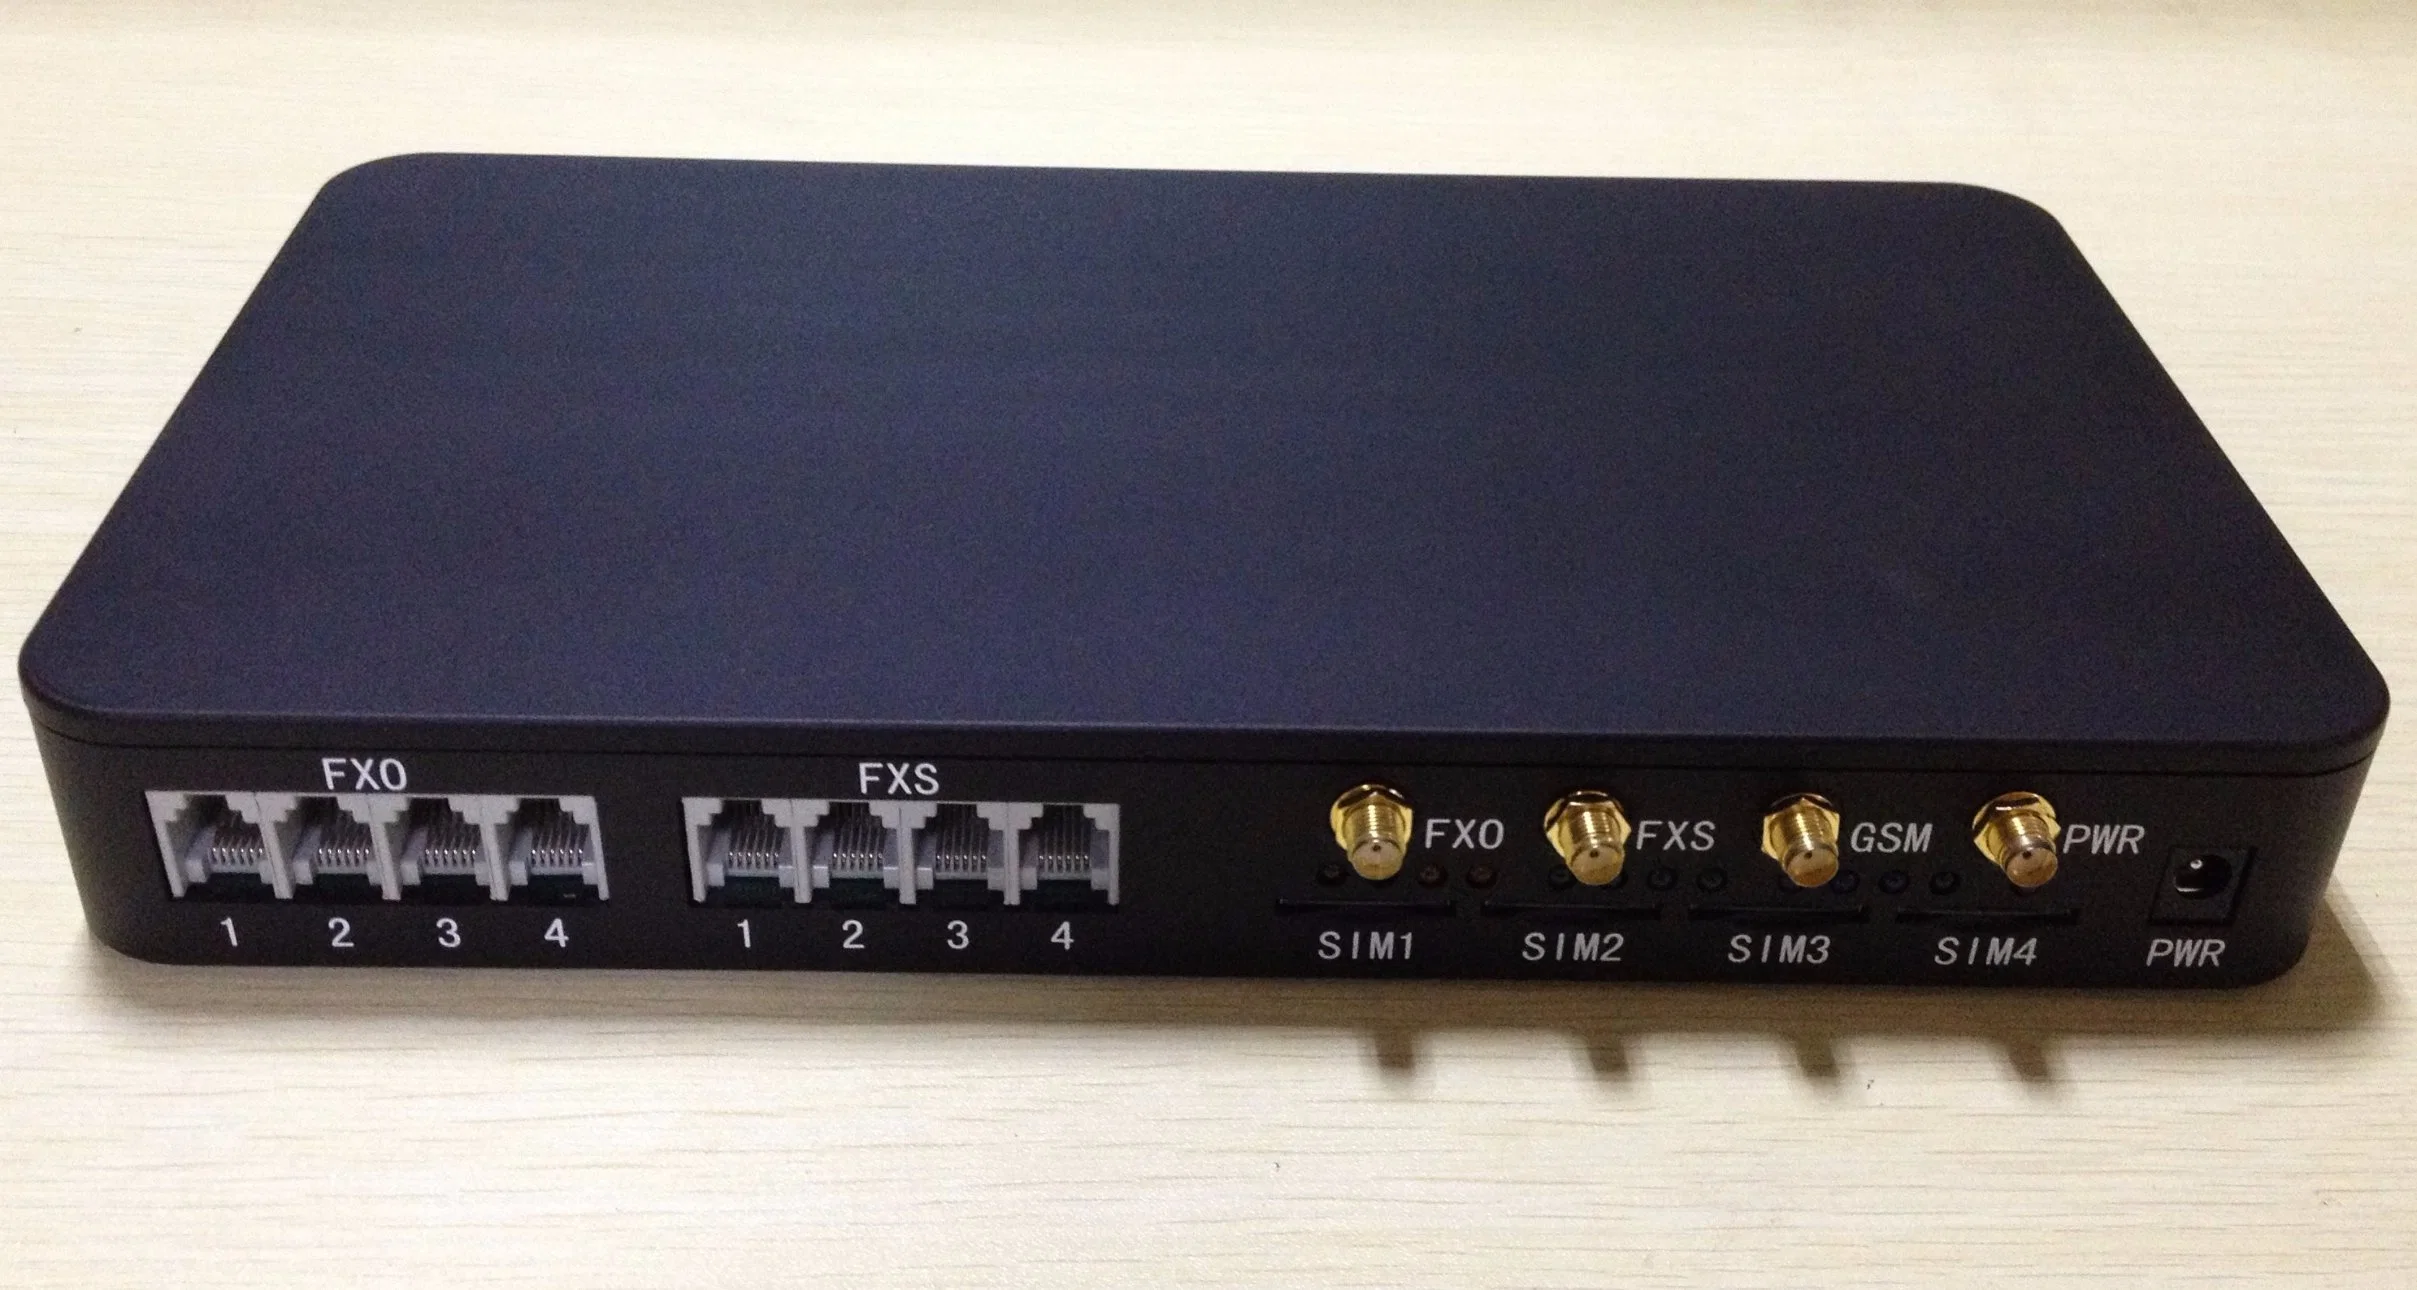 4 Ports GSM PSTN Fixed Wireless Terminal Gateway with Lcr